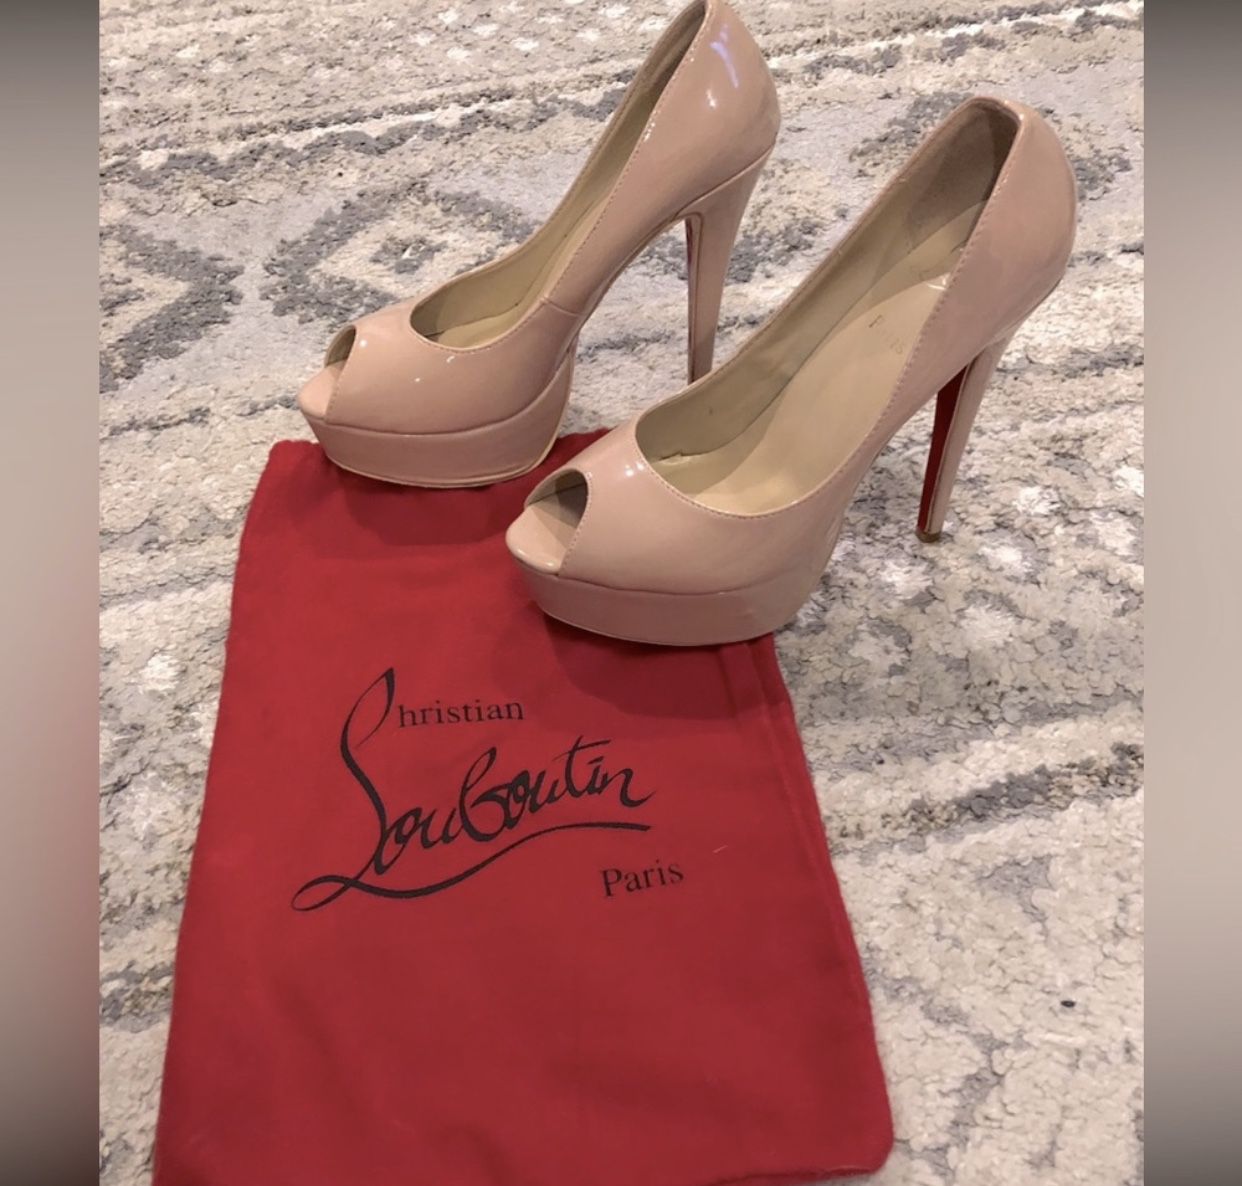 Christian Louboutin “decolette” Toe 85mm Patent Leather Red Sole Pumps size euro 39